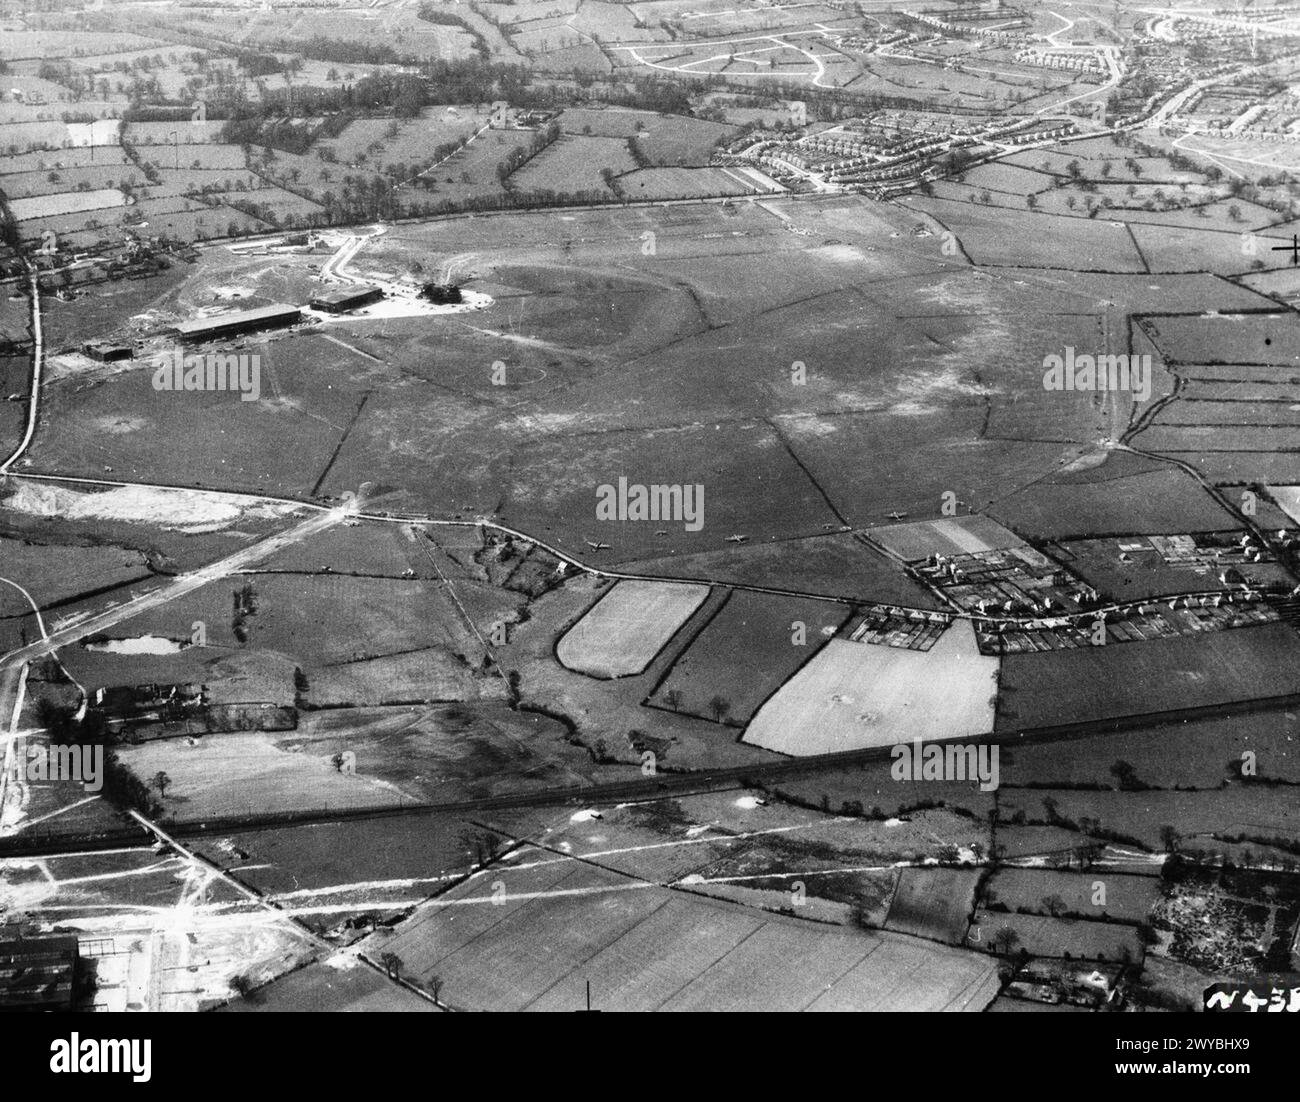 ROYAL AIR FORCE FLYING TRAINING COMMAND, 1940-1945. - Oblique aerial view of RAF Elmdon, Warwickshire, seen from the north-west. A broad concrete taxiway (lower left) leads from the Austin Motors Ltd assembly sheds (partly visible at bottom left), under the Coventry-Birmingham railway line, to the airfield perimeter. Short Stirlings (and, later, Avro Lancasters) built at Austin's Longbridge plant were assembled here and tested at Elmdon before their delivery flights. Note the attempt to camouflage the grass airfield with a field pattern and hedegrows. , Royal Air Force, 1 Camouflage Unit Stock Photo